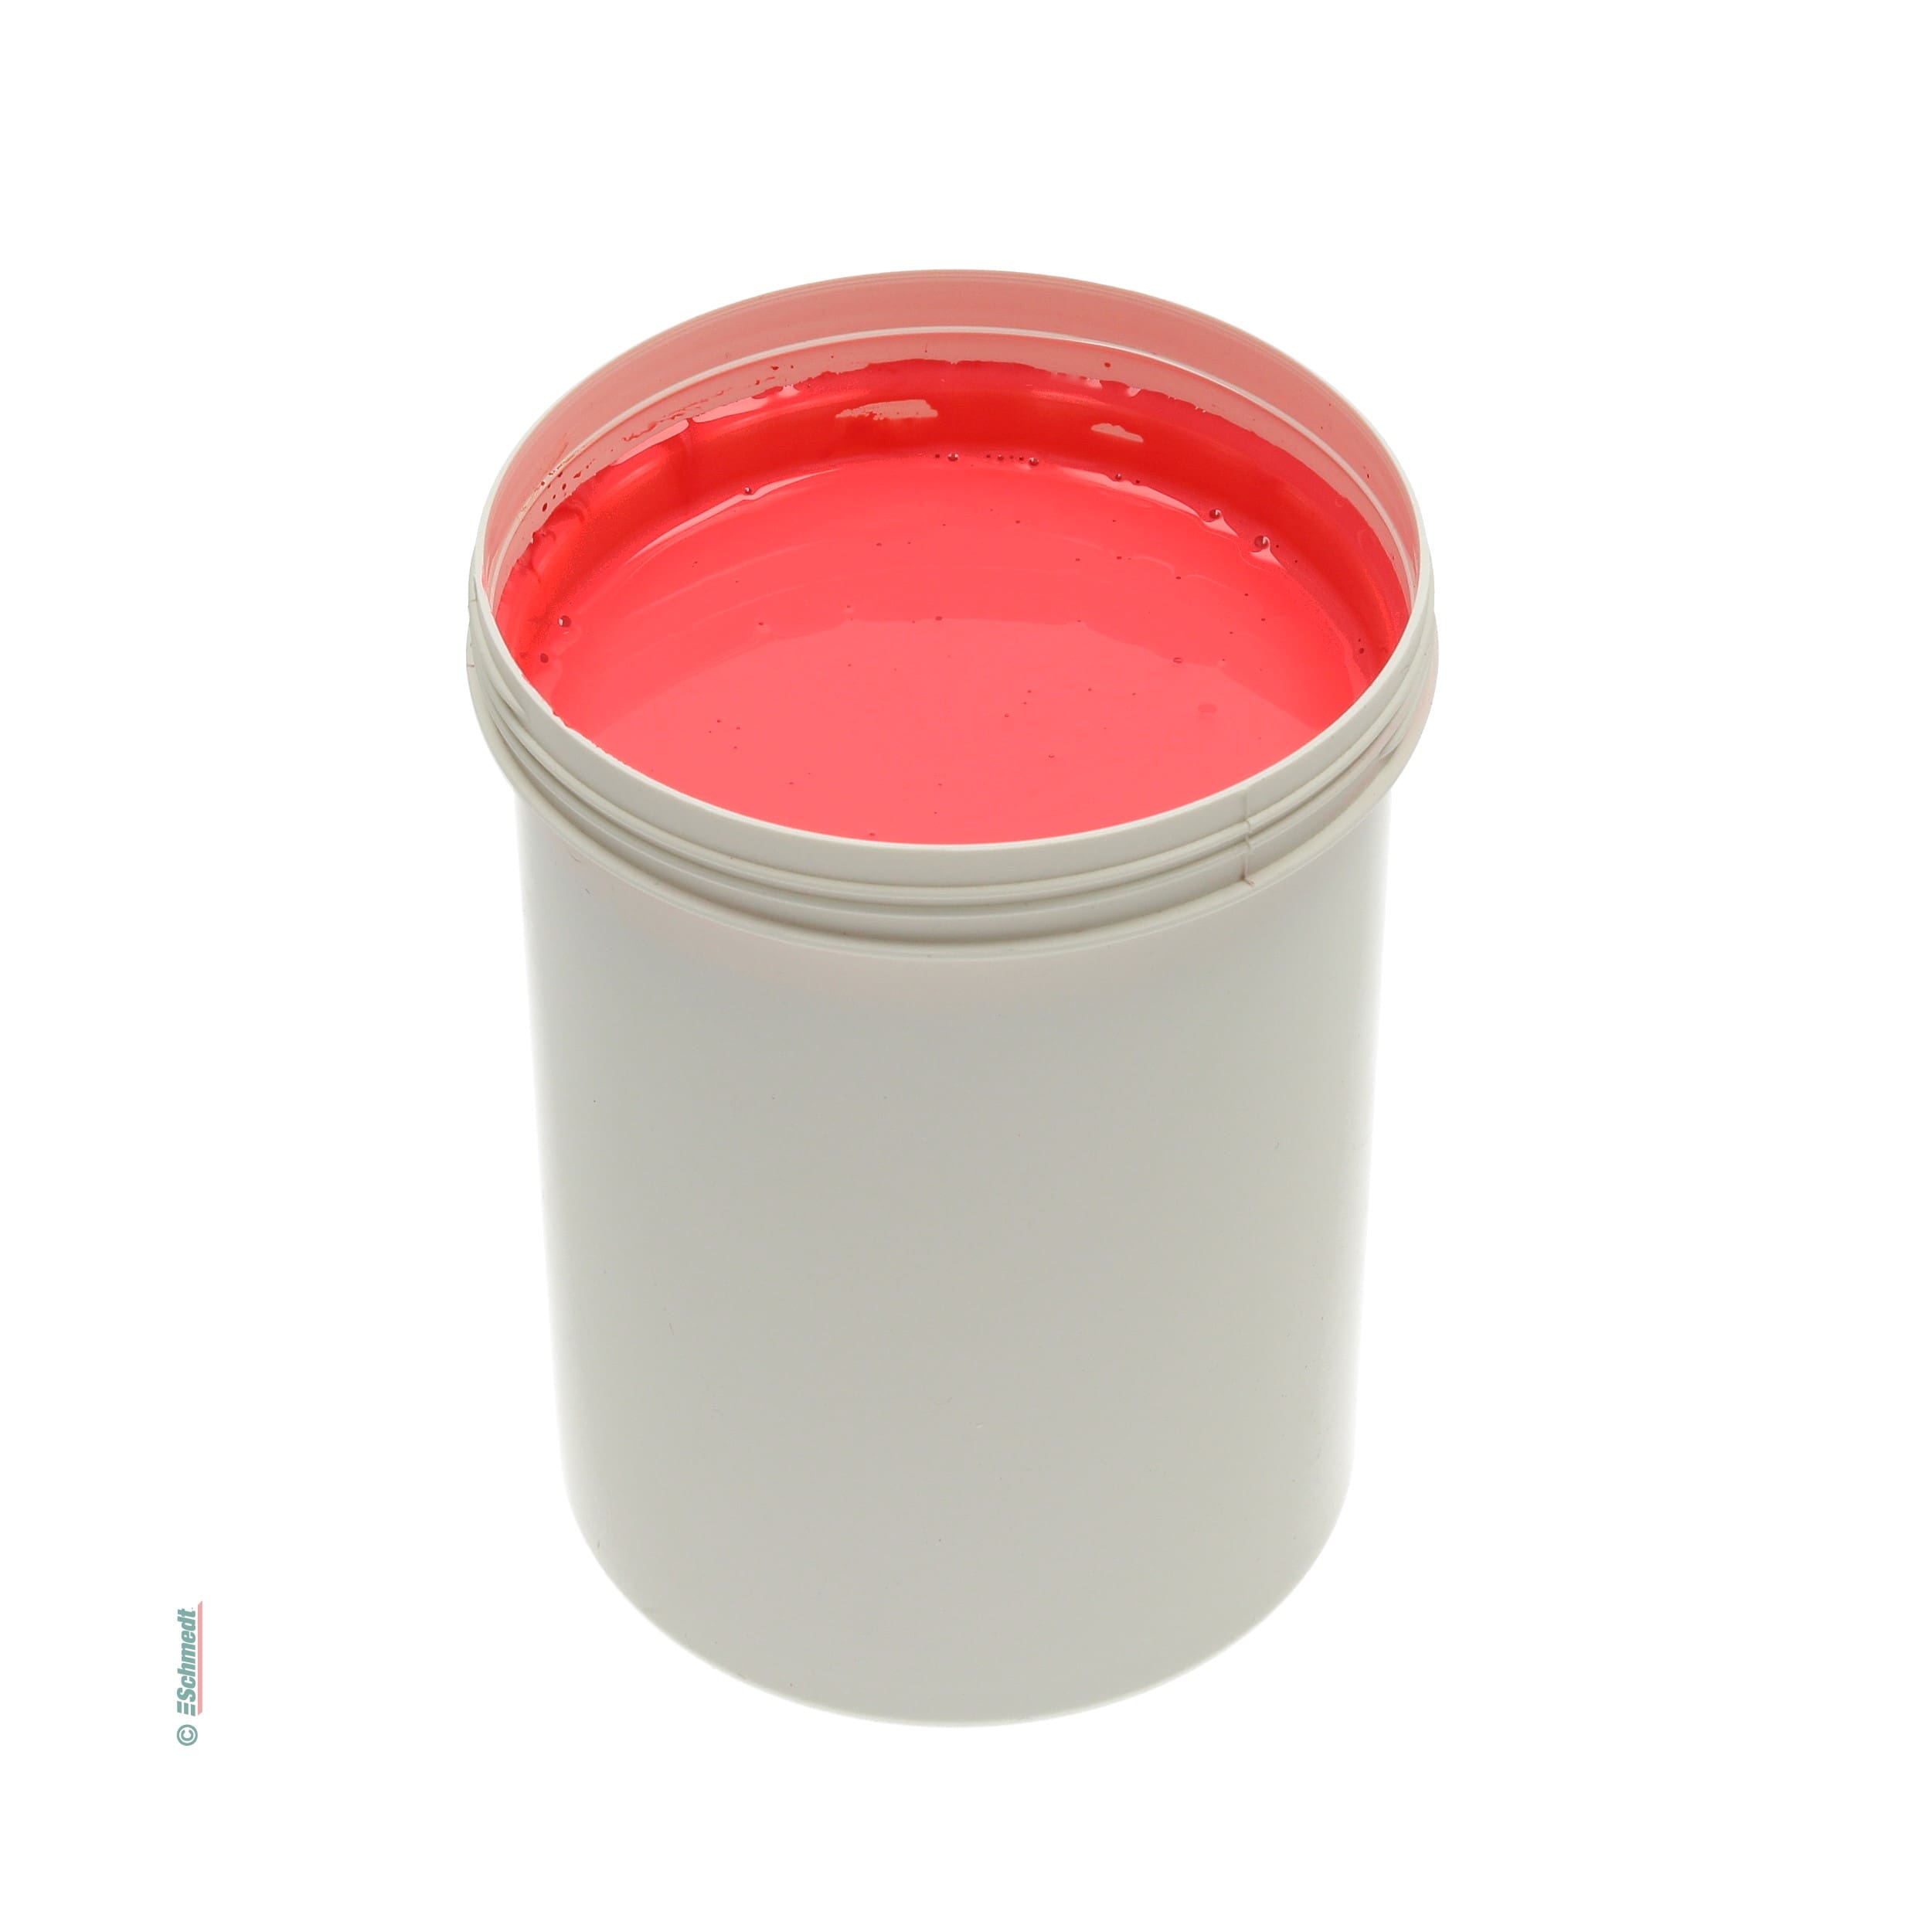 Glue dye - Colour red - Contents Bottle / 100 ml - to dye dispersion glues such as pad-binding or perfect-binding glue to bind note pads or ... - image-1